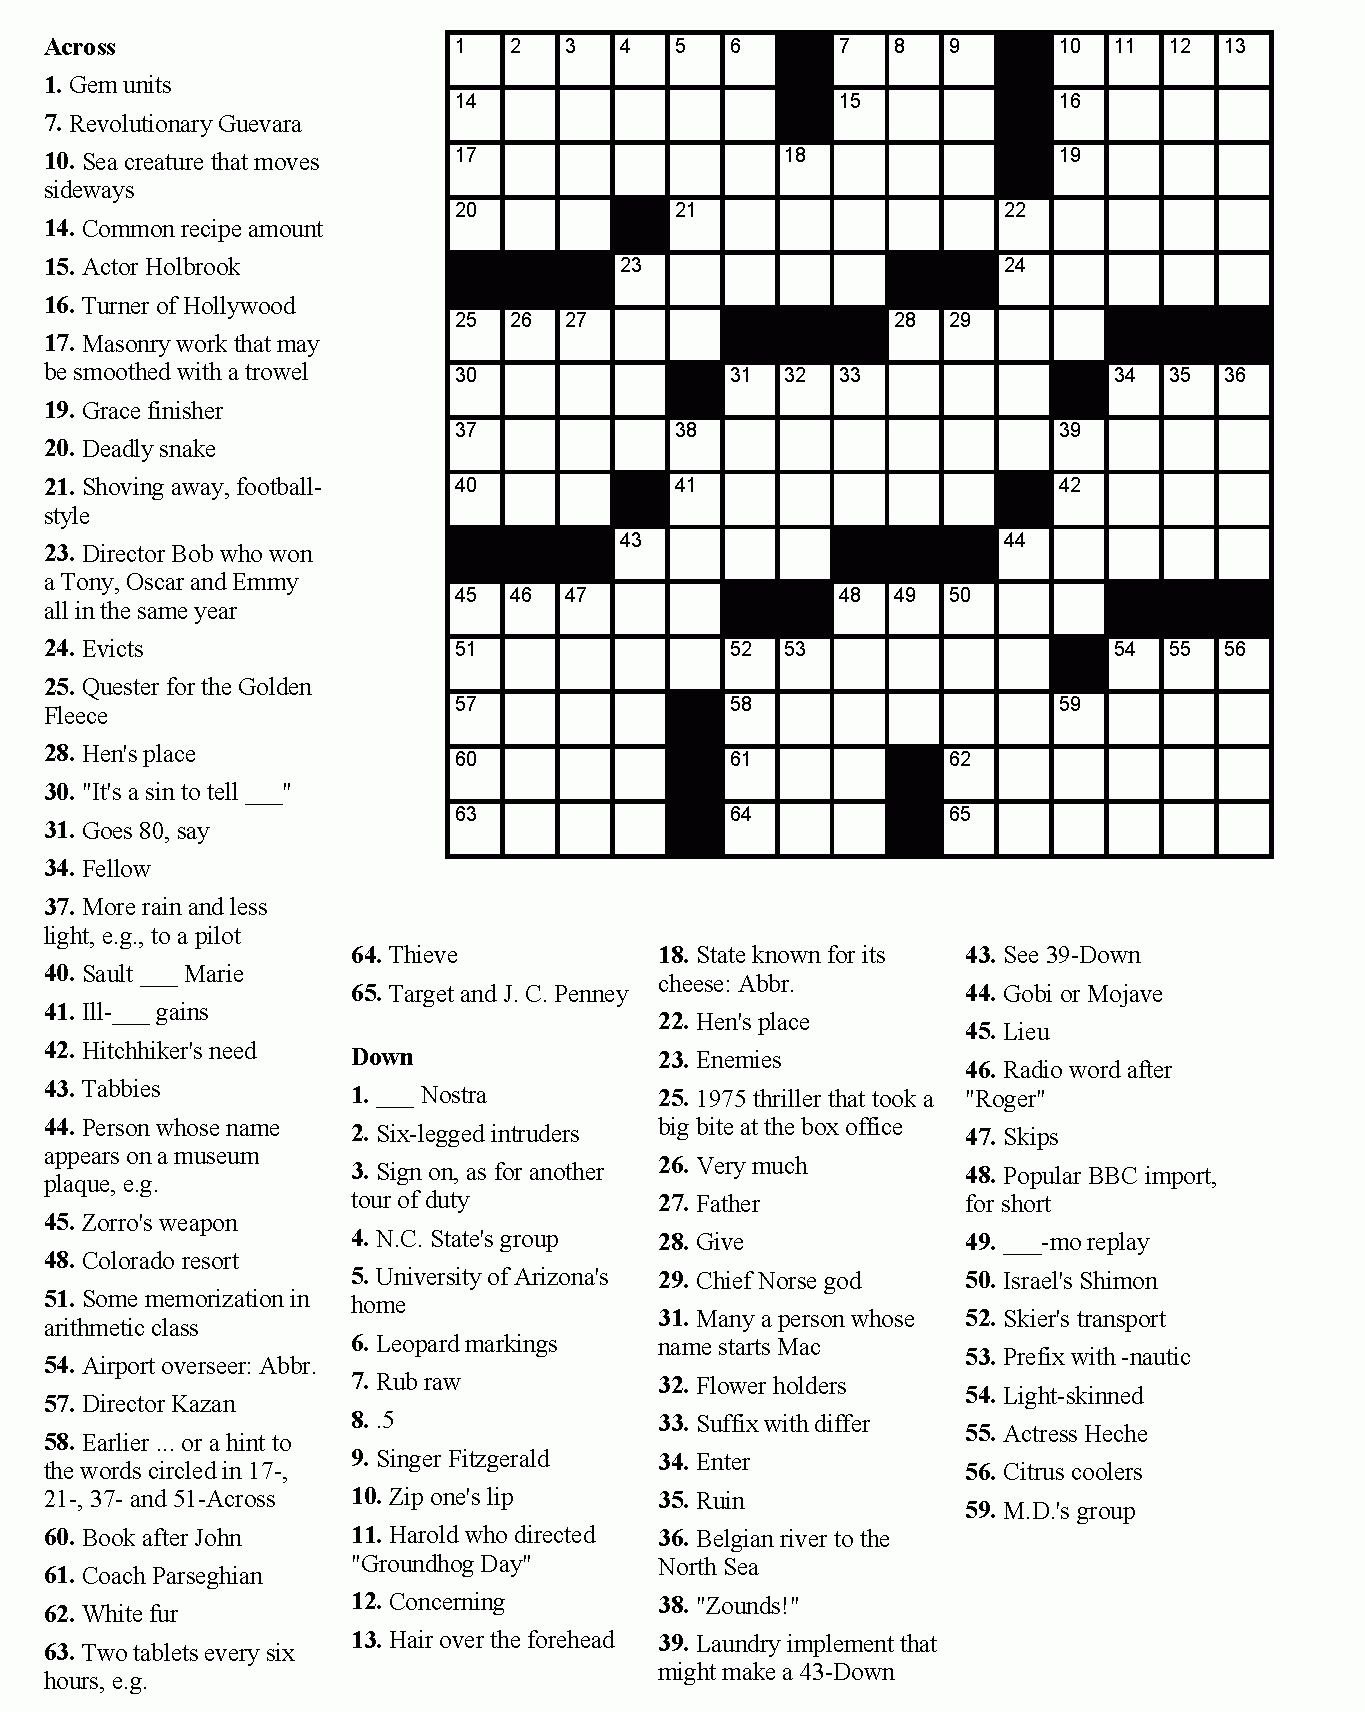 Free Printable Crossword Puzzles Easy For Adults | My Board | Free - Printable Crossword Puzzles For Adults Easy